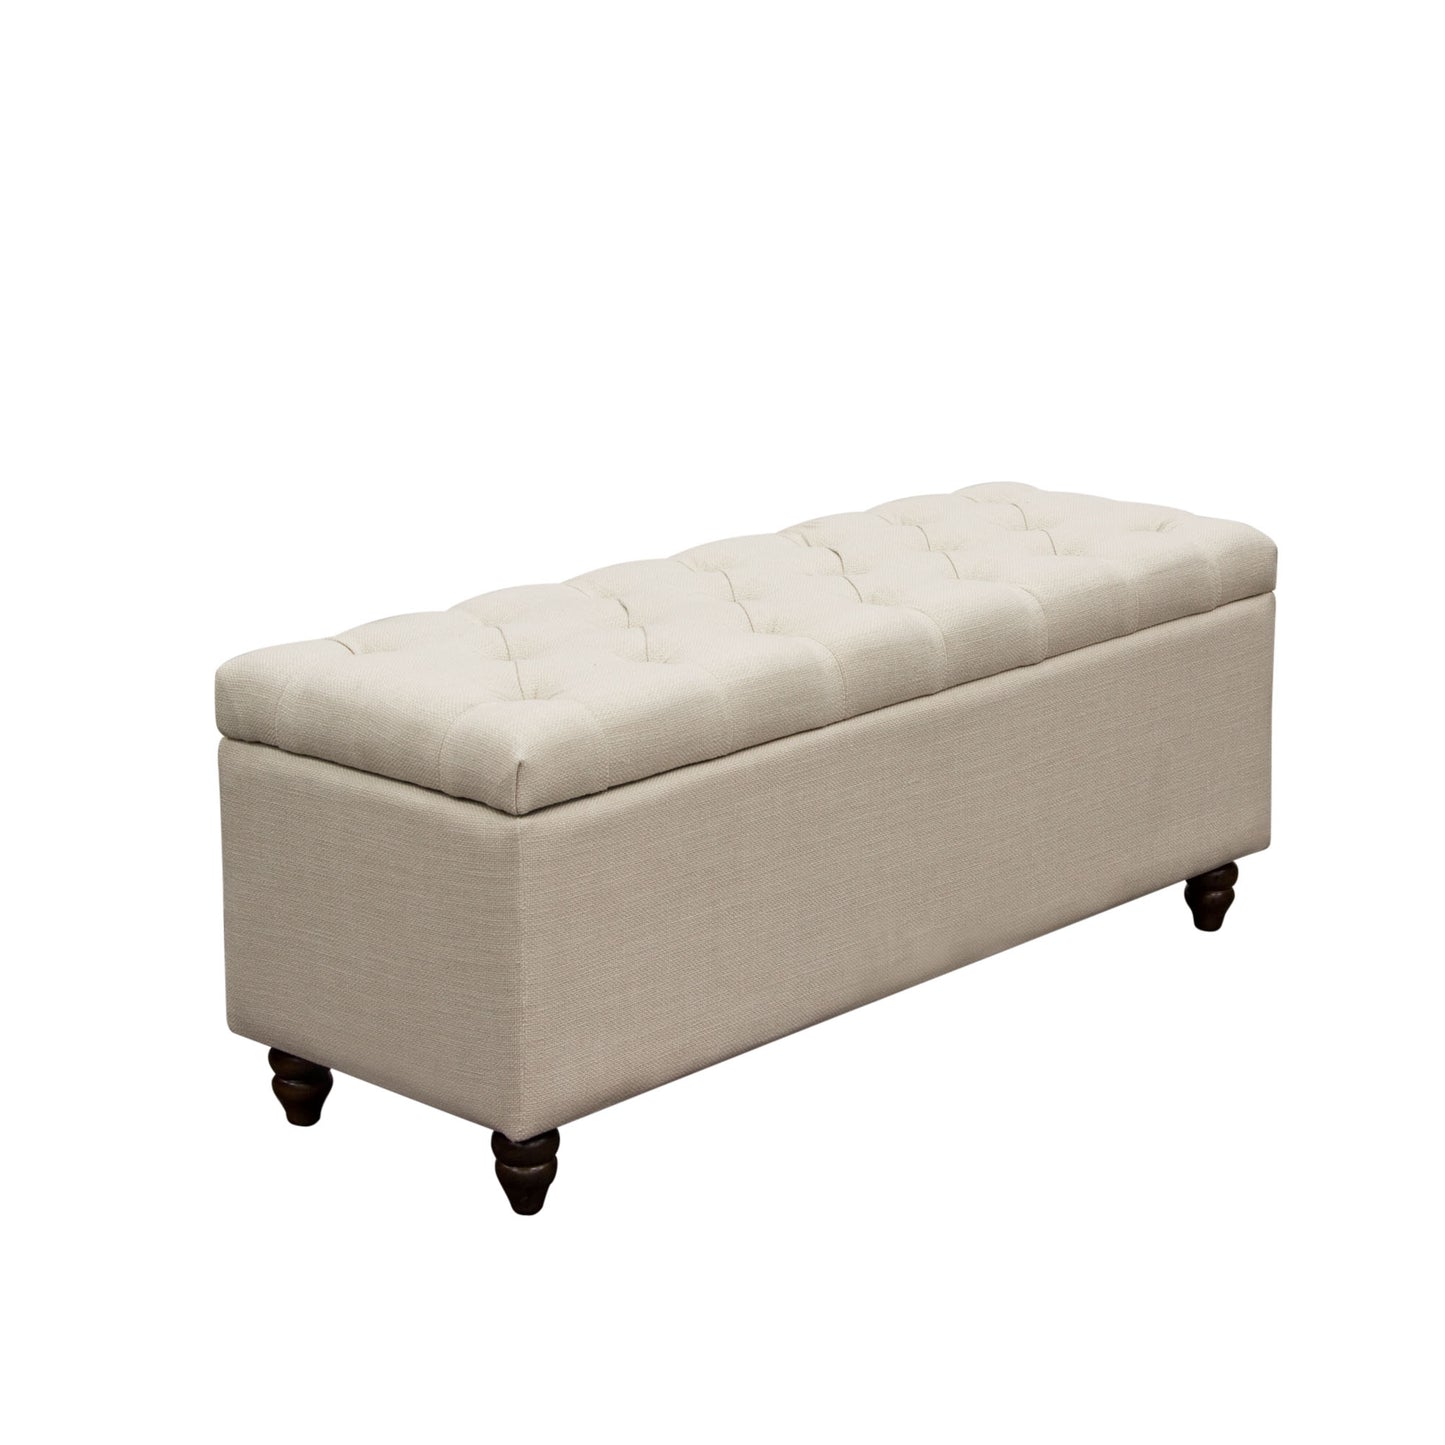 Park Tufted Storage Accent Trunk